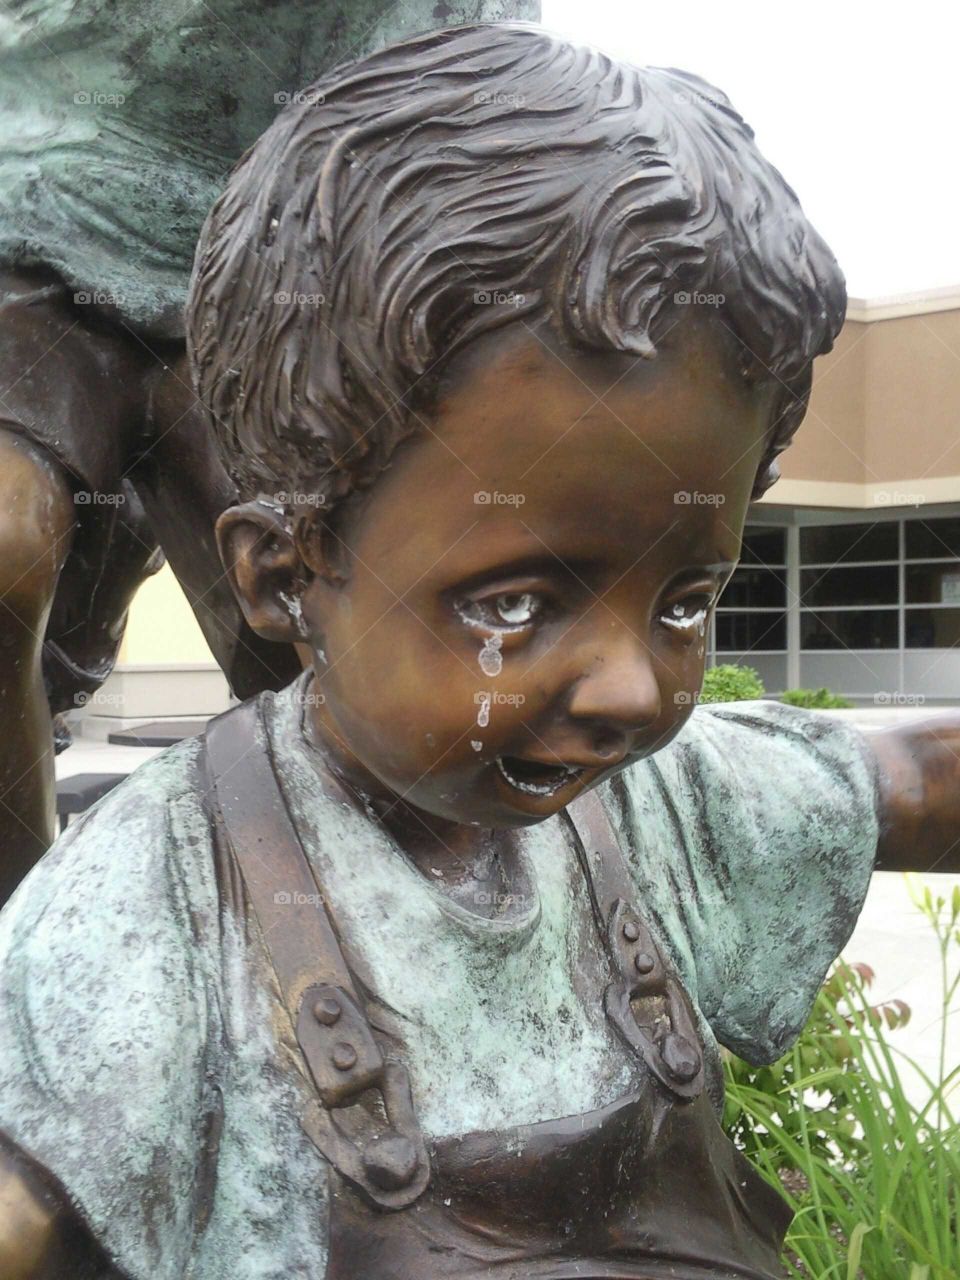 Bronze statue of happy child with ironic patina tears.